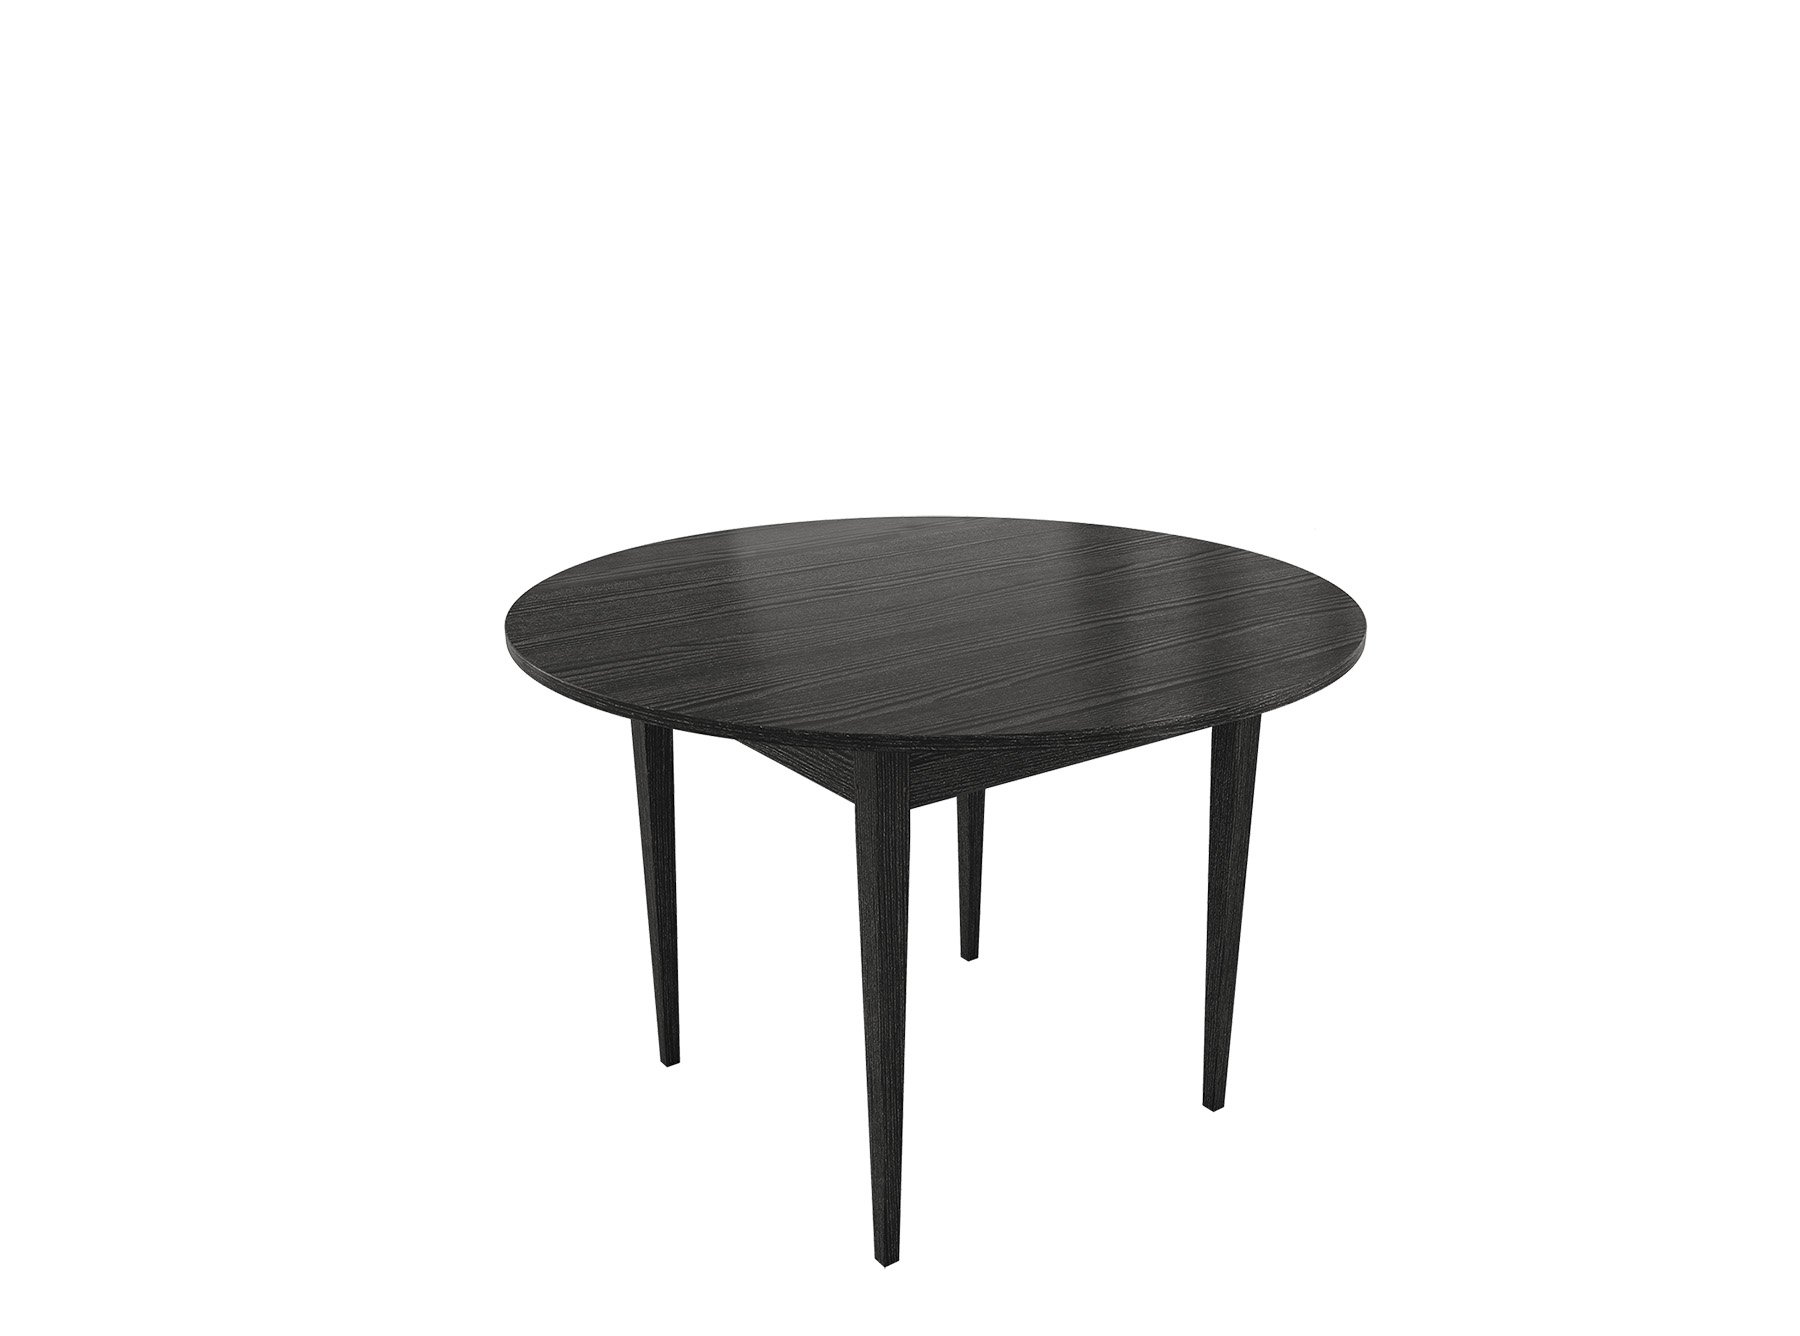 HARVEST DINING TABLE - 44" ROUND - $4,014